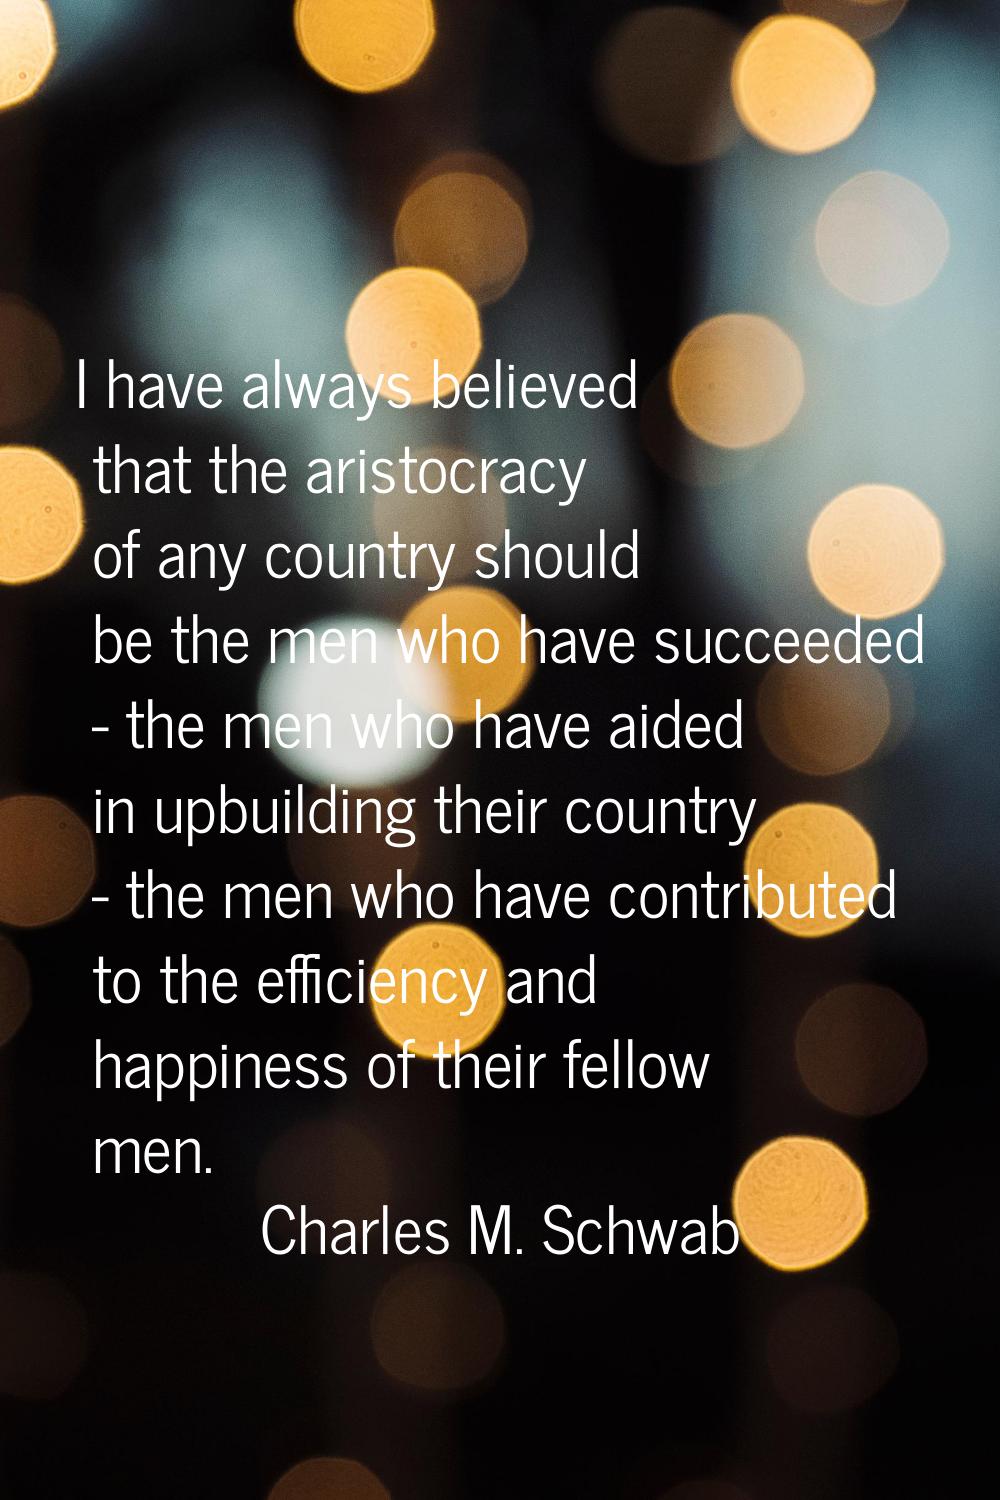 I have always believed that the aristocracy of any country should be the men who have succeeded - t